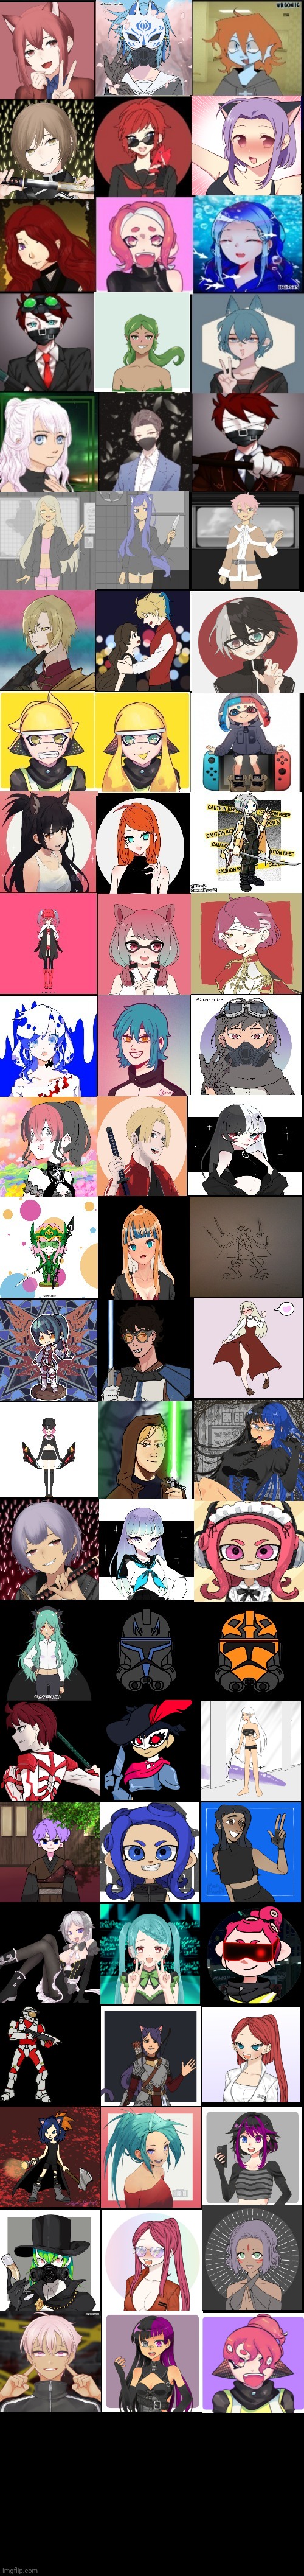 72 oc to rp with, holy sh*t (max limit of ocs that I can rp at once is 3) | made w/ Imgflip meme maker